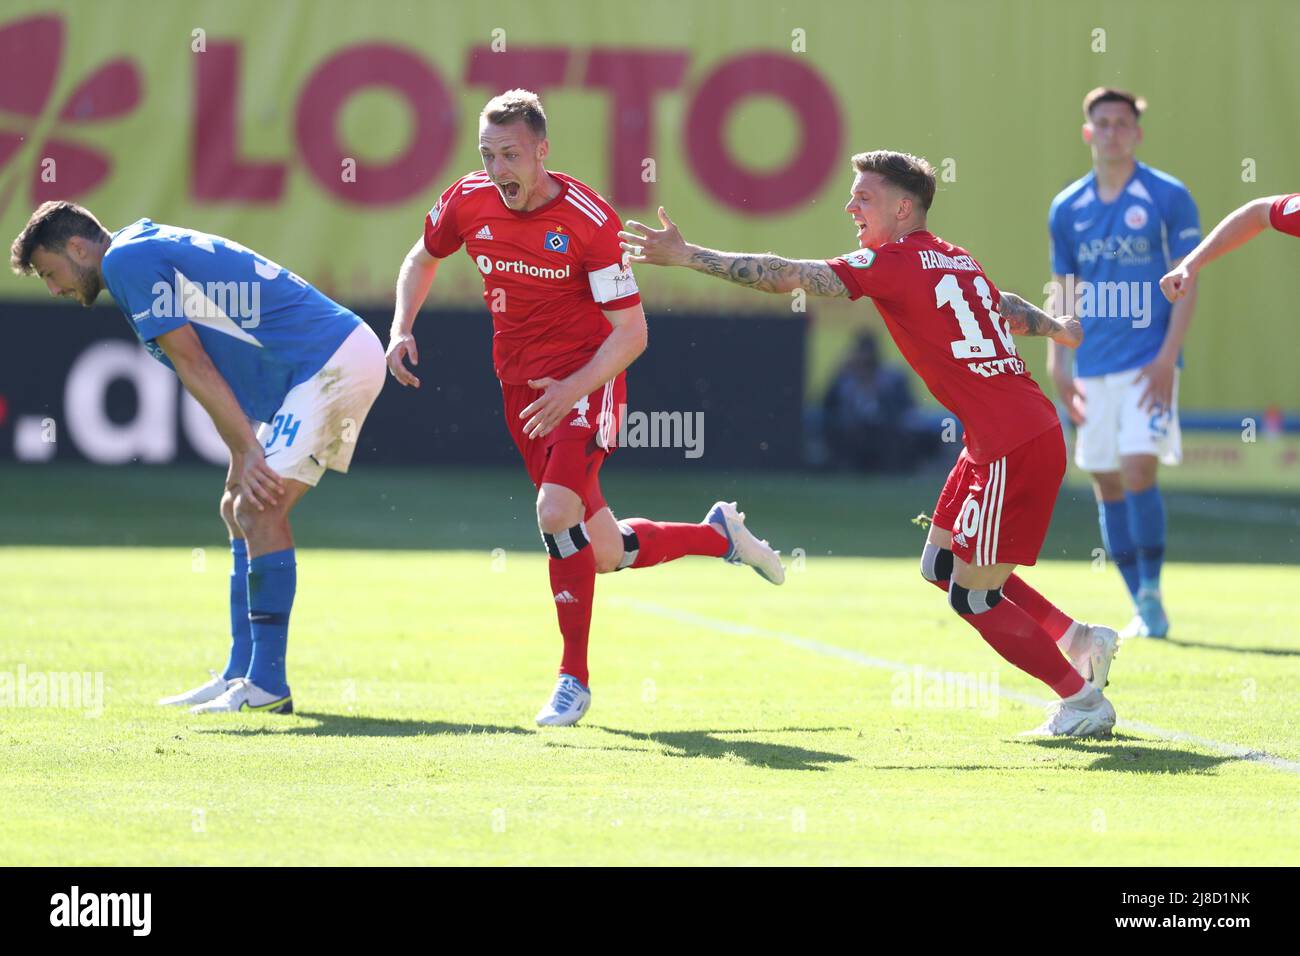 15 May 2022, Mecklenburg-Western Pomerania, Rostock: Soccer: 2nd Bundesliga, Hansa Rostock - Hamburger SV, Matchday 34, Ostseestadion. Sebastian Schonlau (center) of Hamburger SV celebrates the goal to make it 1:2. Photo: Danny Gohlke/dpa - IMPORTANT NOTE: In accordance with the requirements of the DFL Deutsche Fußball Liga and the DFB Deutscher Fußball-Bund, it is prohibited to use or have used photographs taken in the stadium and/or of the match in the form of sequence pictures and/or video-like photo series. Stock Photo